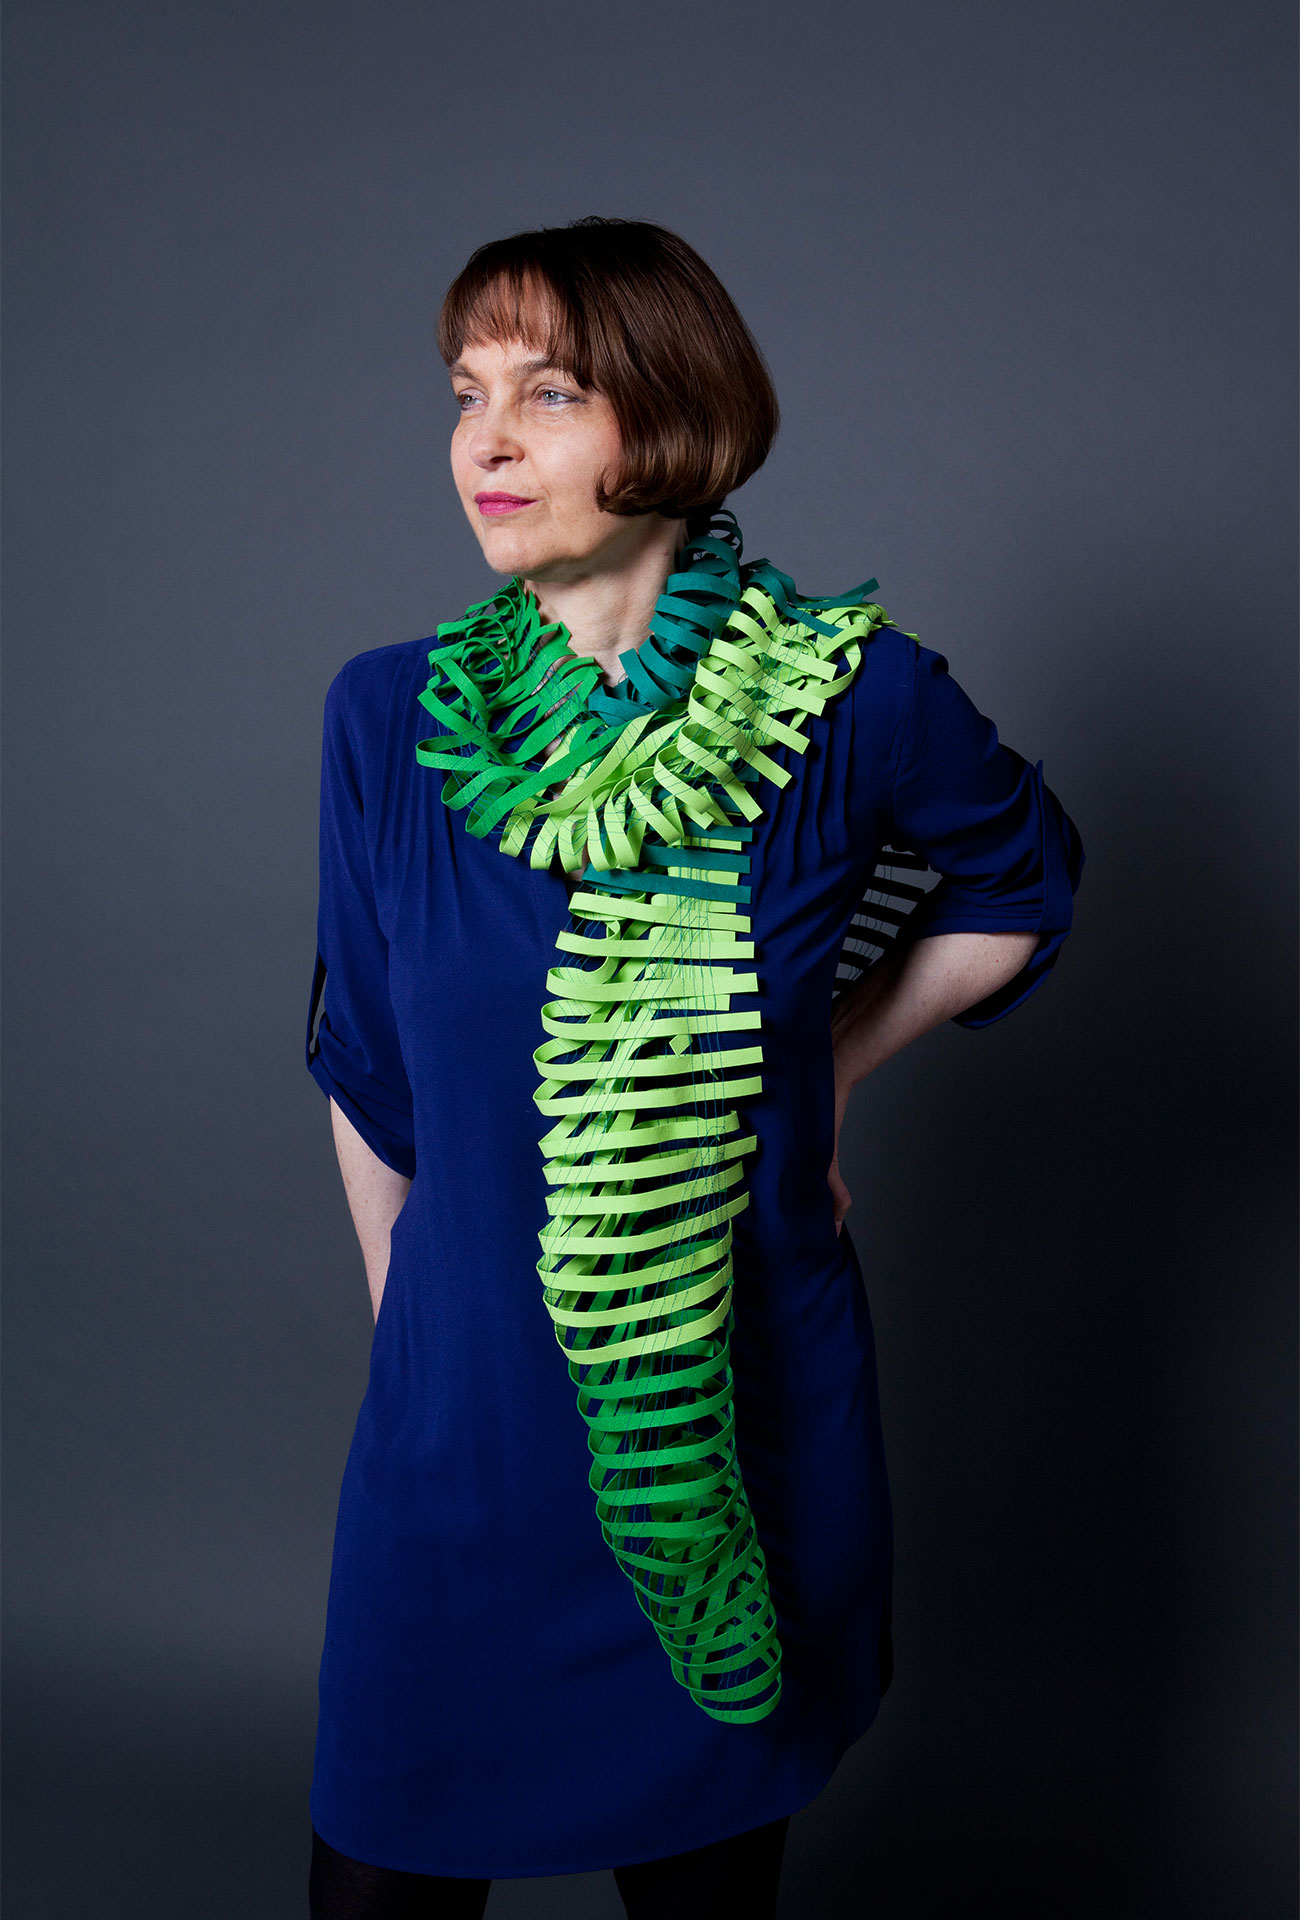 Ulrike Isensee with her scarf object. Sewn fabric strips with a leather effect